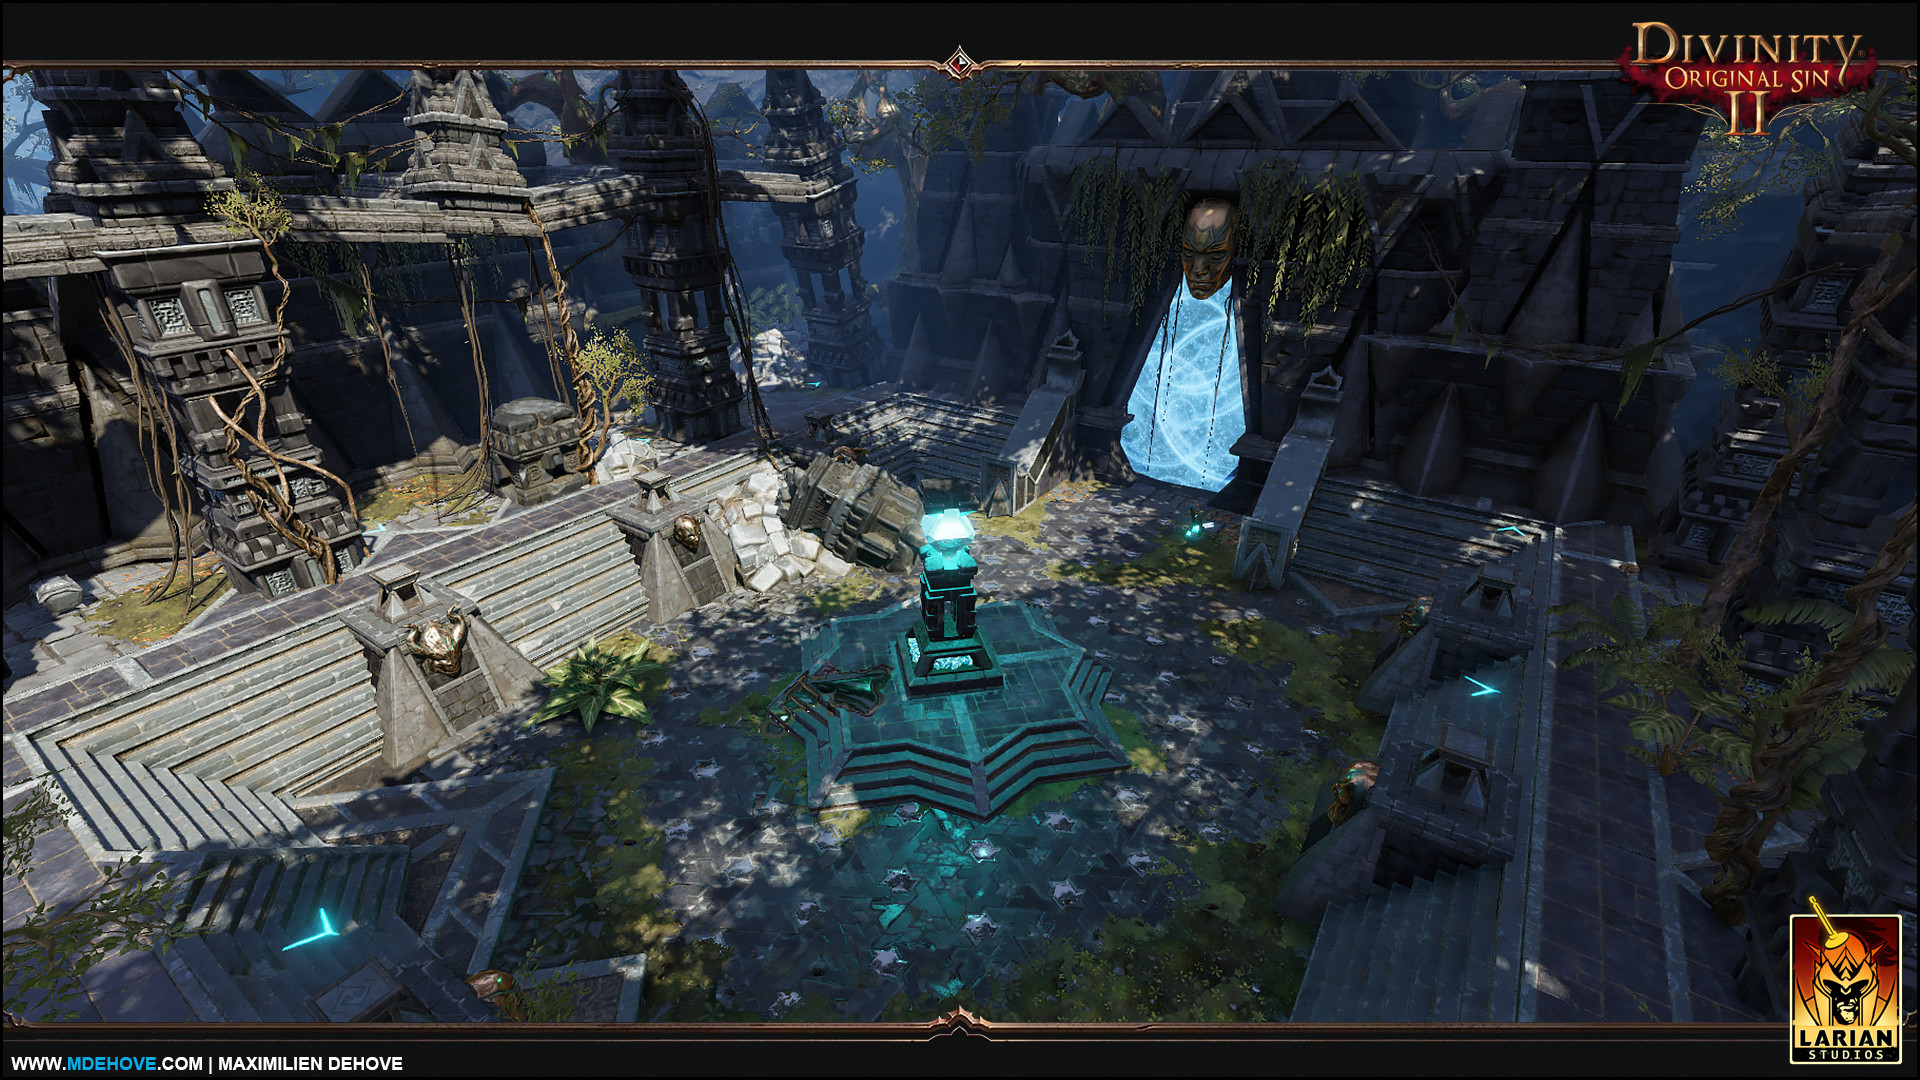 Close Up To 2 Modules With Interior And Exterior View - Divinity Original Sin 2 Dungeon , HD Wallpaper & Backgrounds